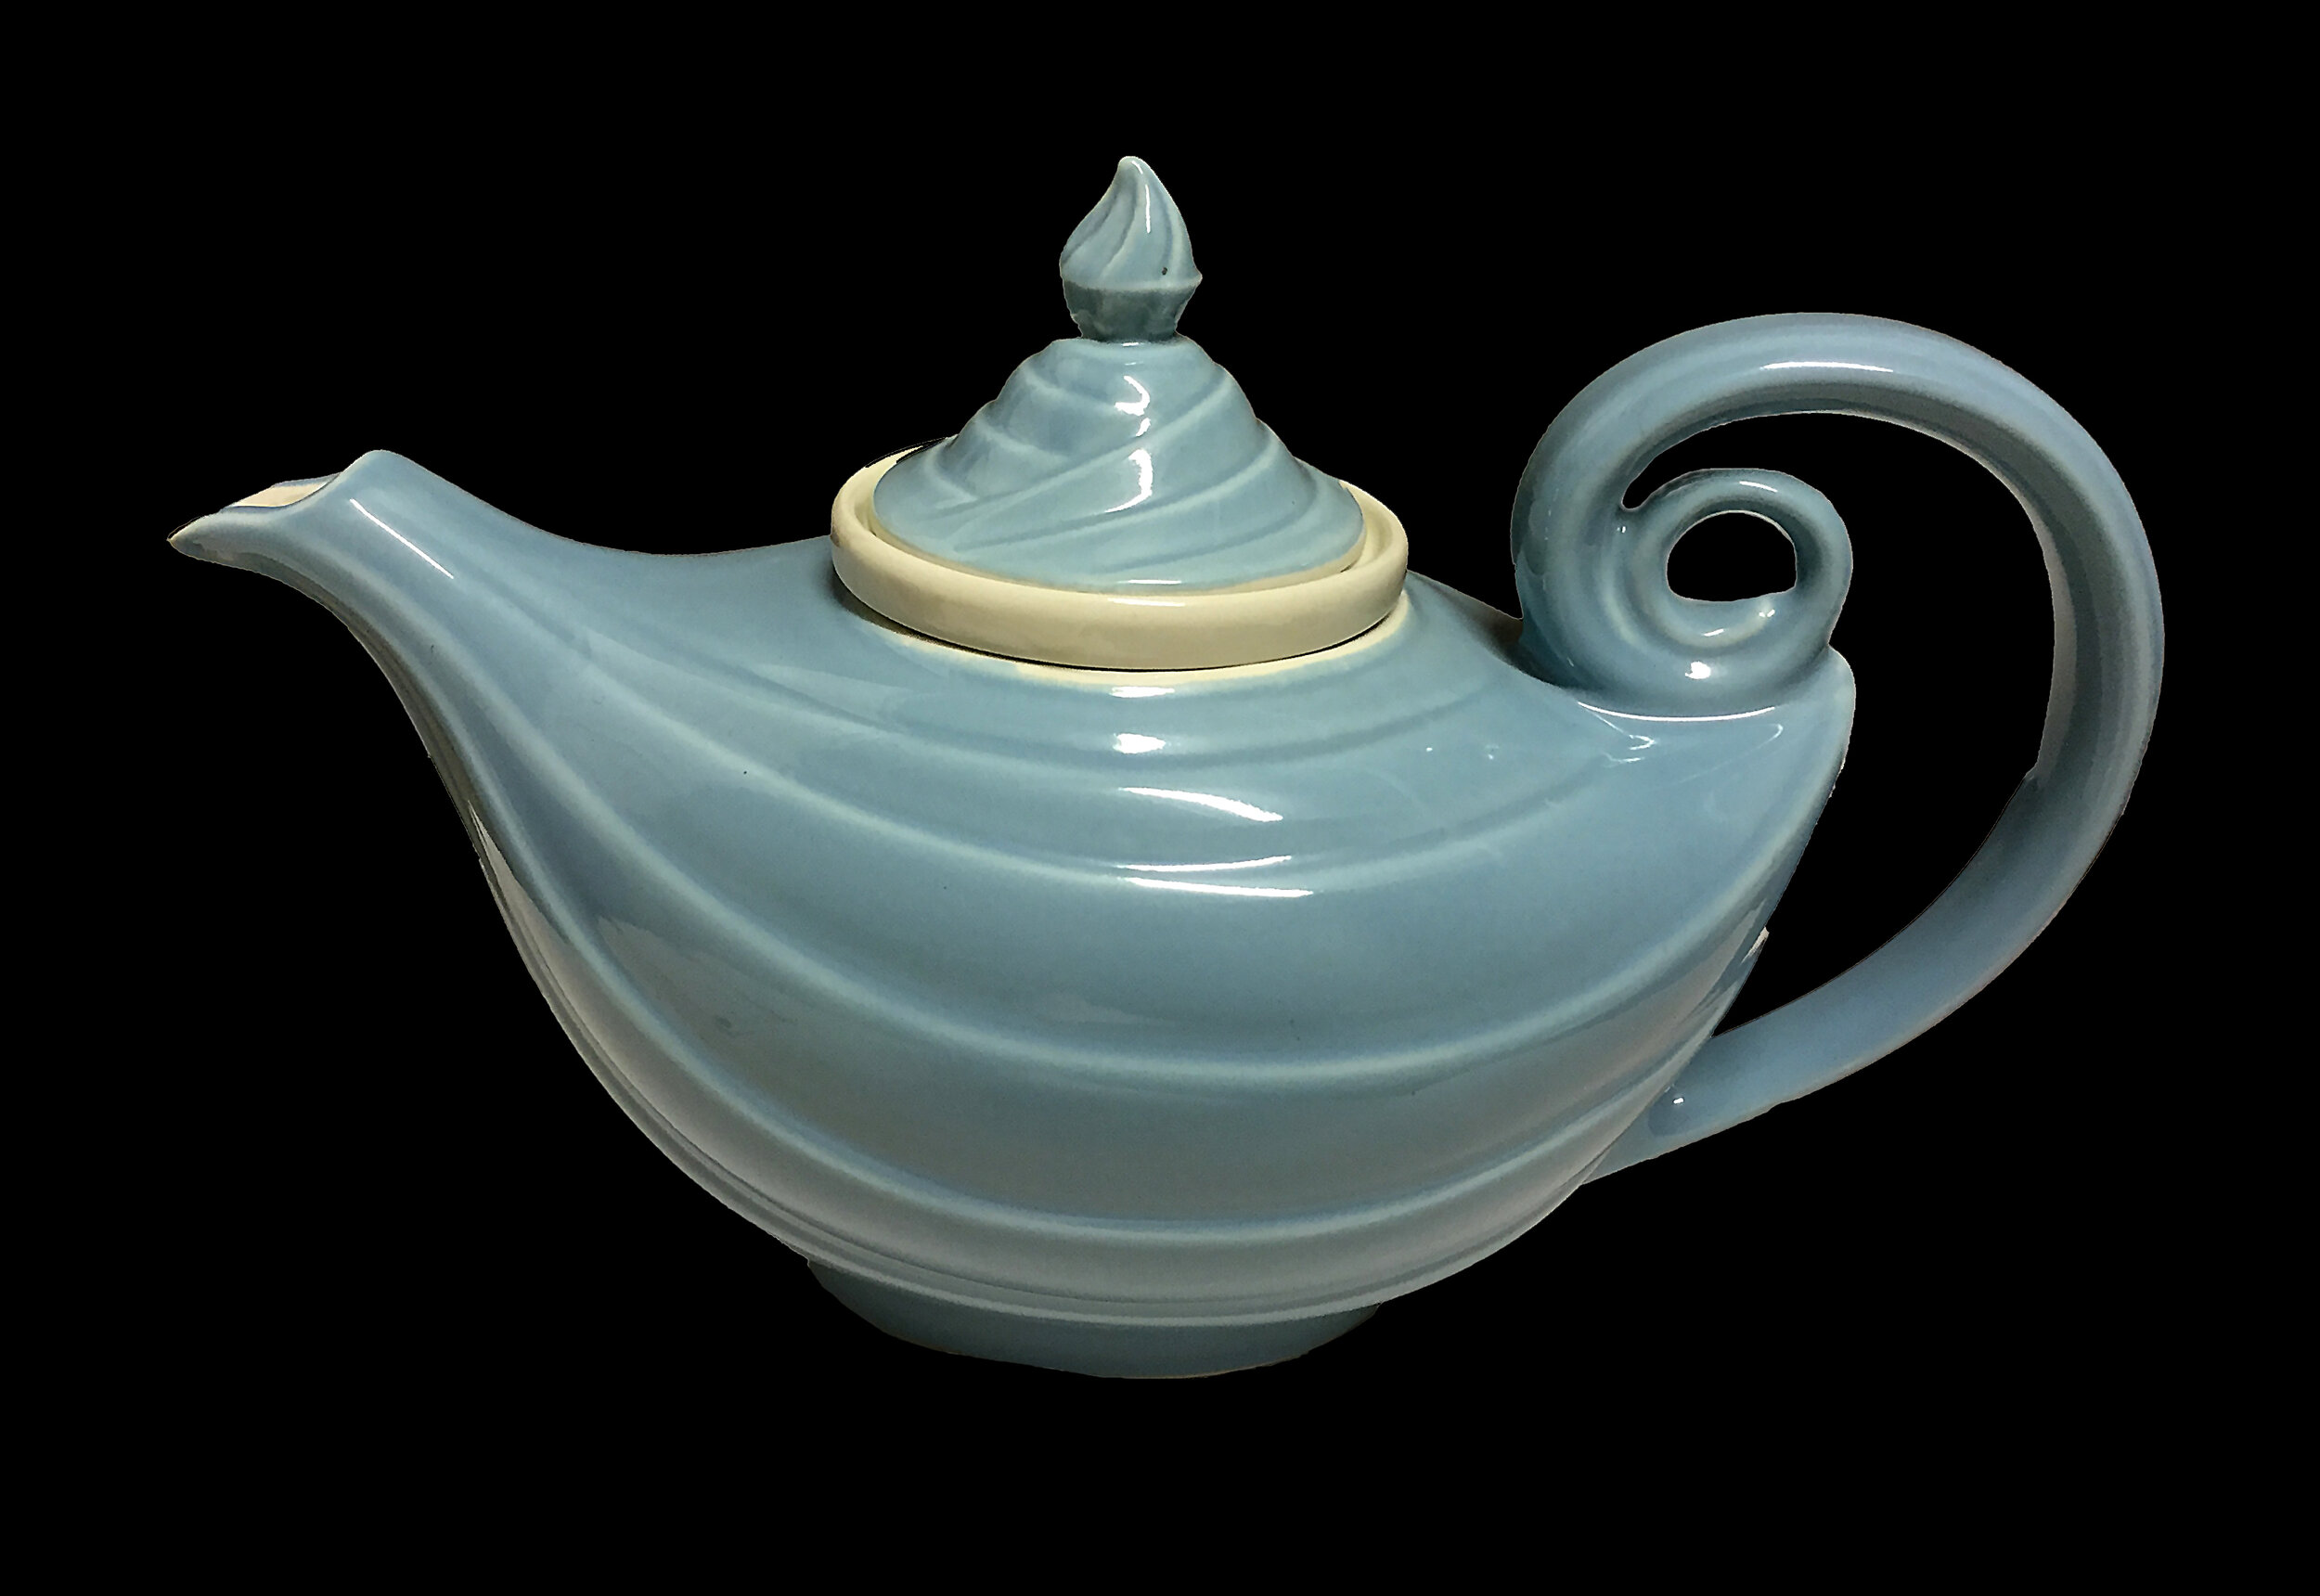 HALL'S Superior Quality Kitchenware Aladdin Teapot with Infuser ...